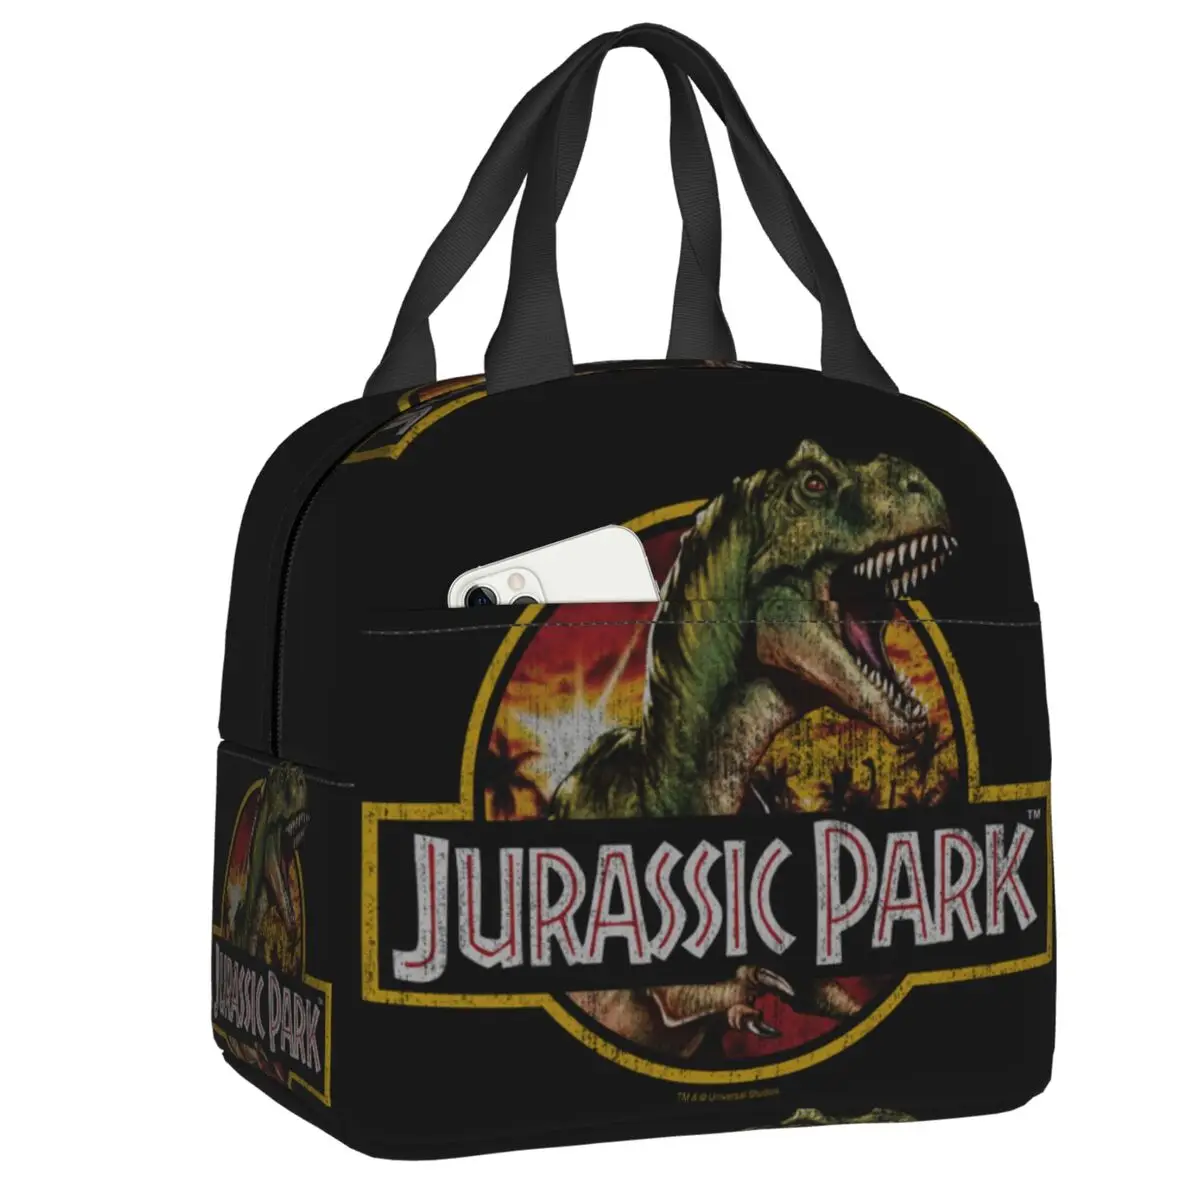 Jurassic Park Resuable Lunch Box for Women Waterproof Dinosaur World Thermal Cooler Food Insulated Lunch Bag Kid School Children